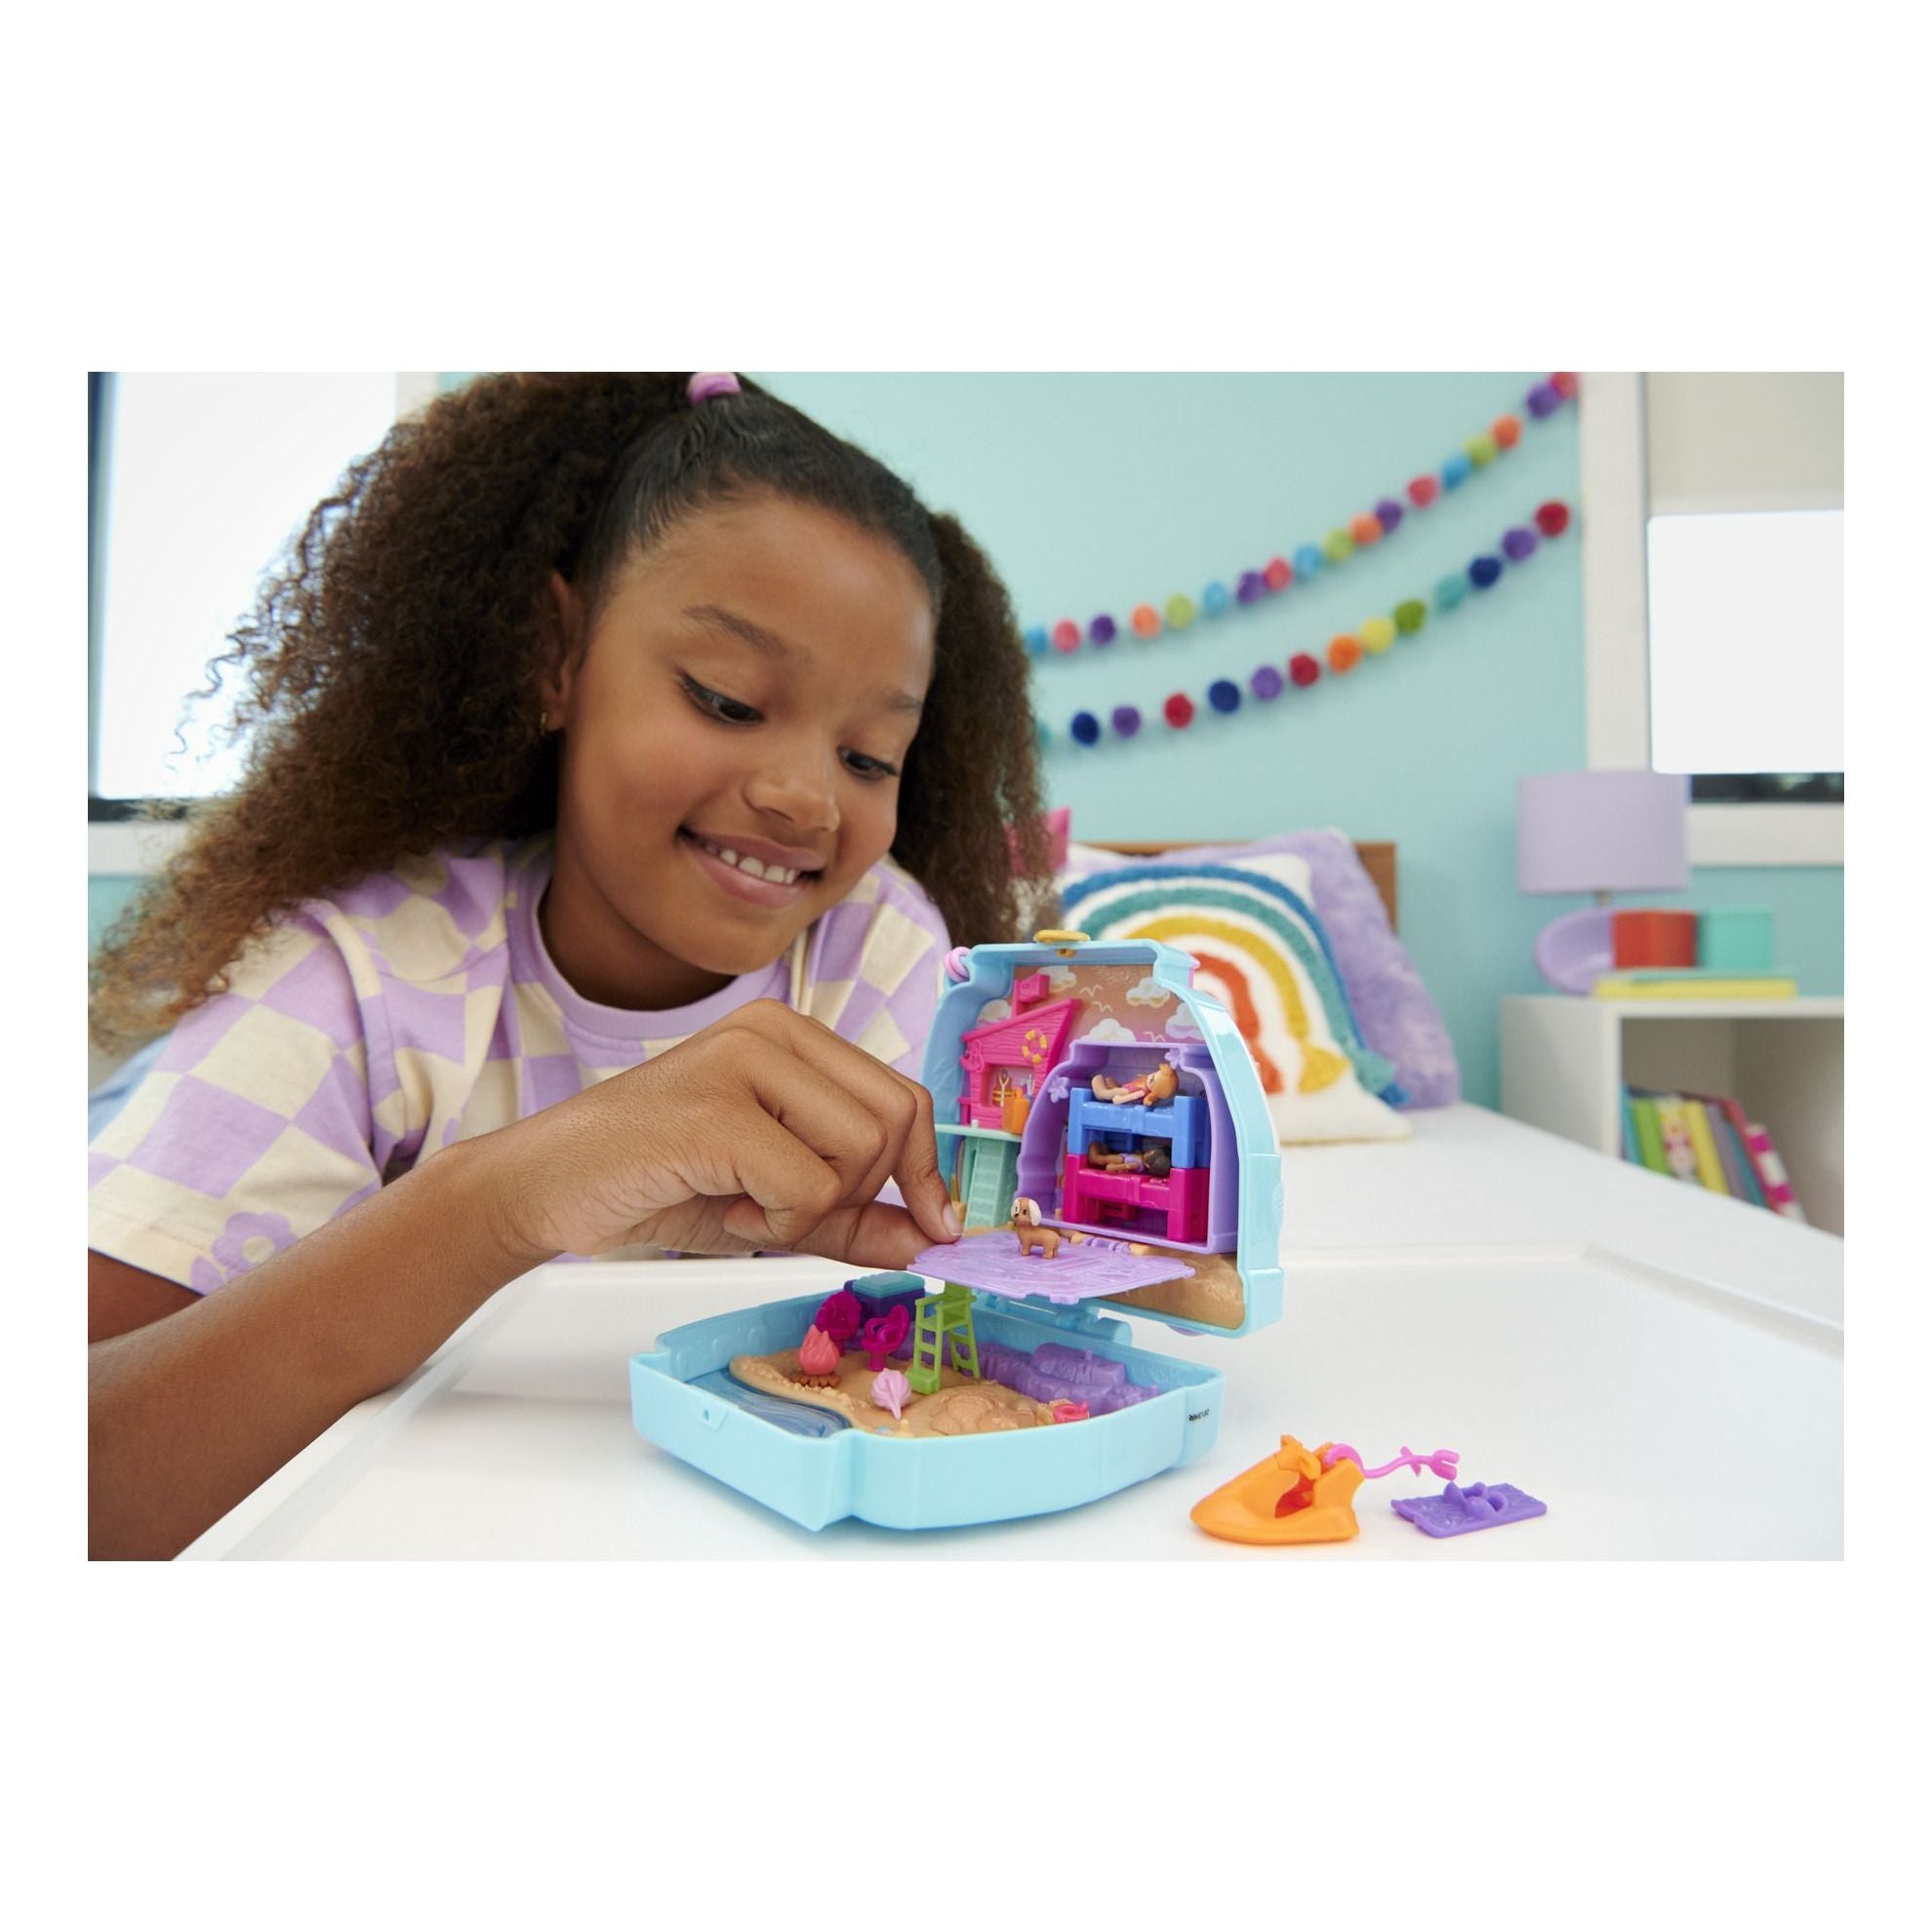 Polly Pocket Seaside Puppy Ride Compact Polly Pocket